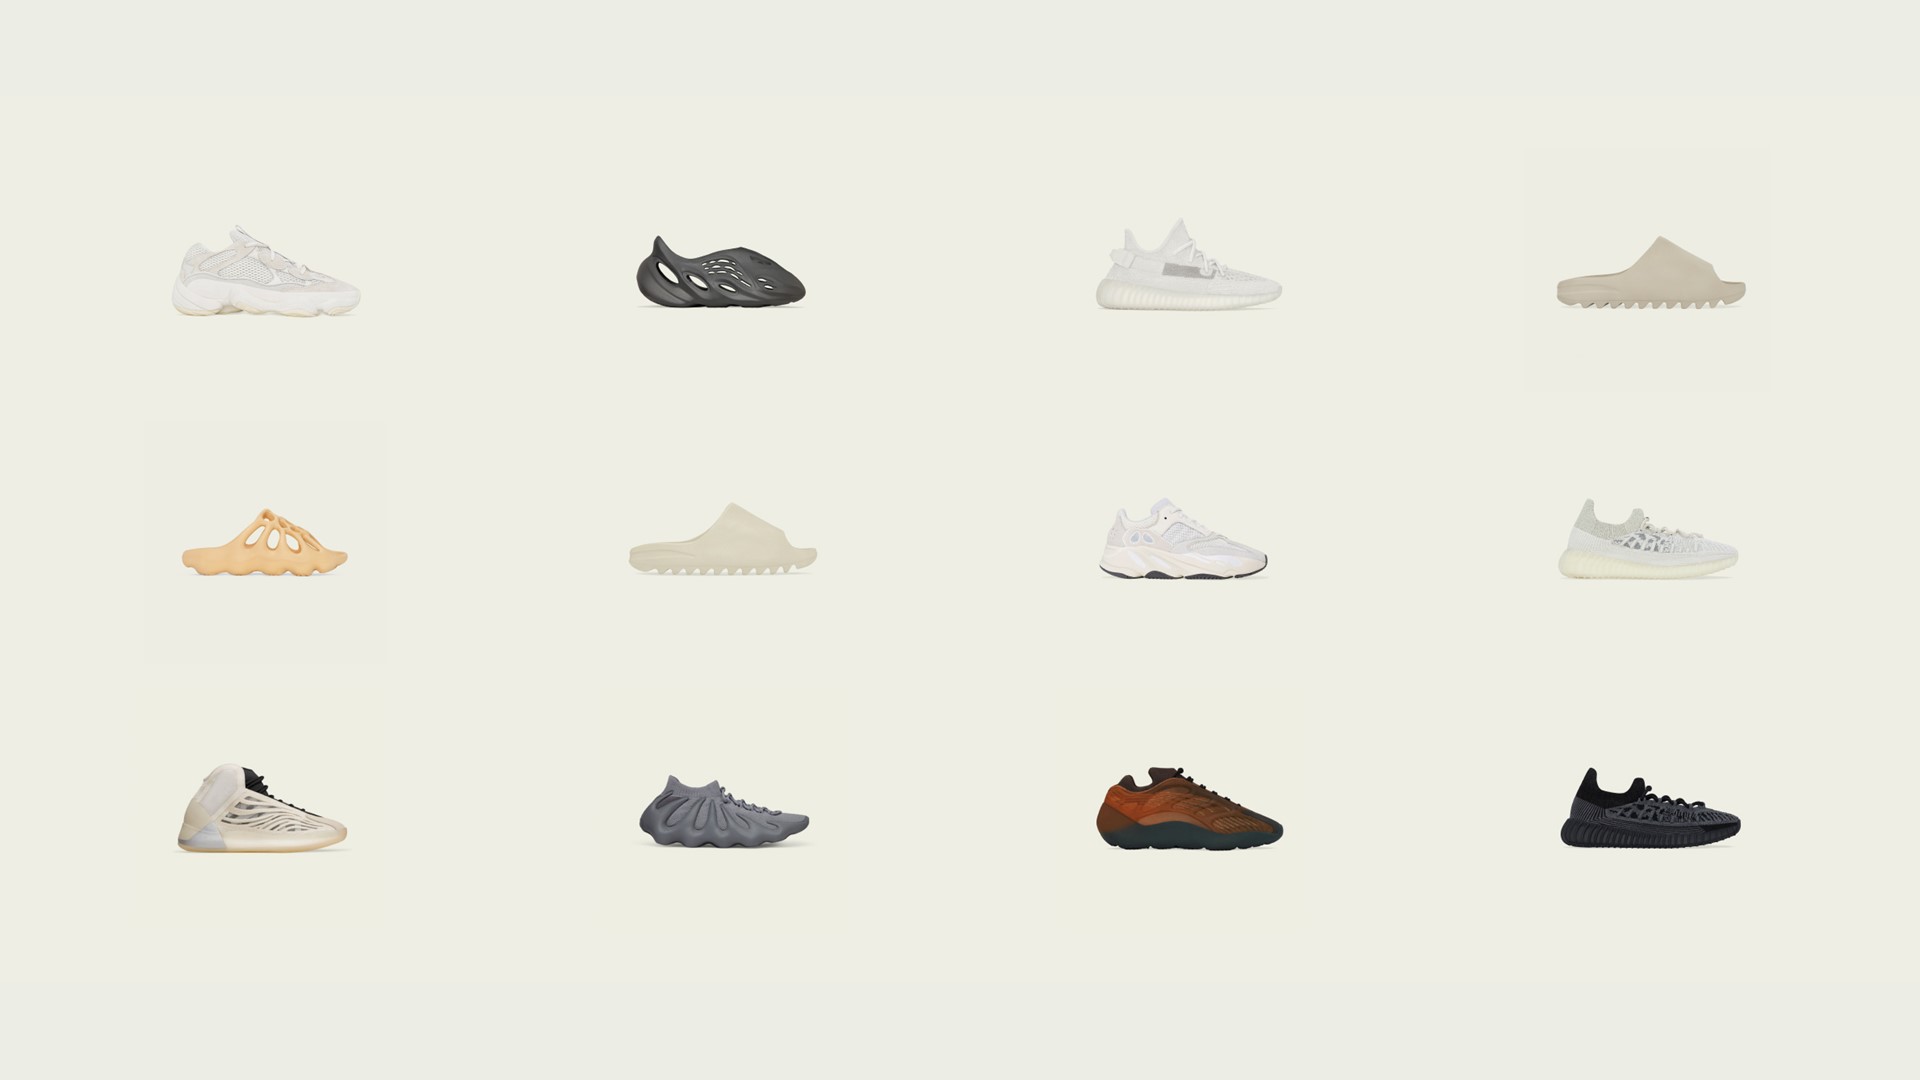 Misbruik Bijna Heel adidas announces further release of existing Yeezy products in August with  continued commitment to combatting discrimination and hate